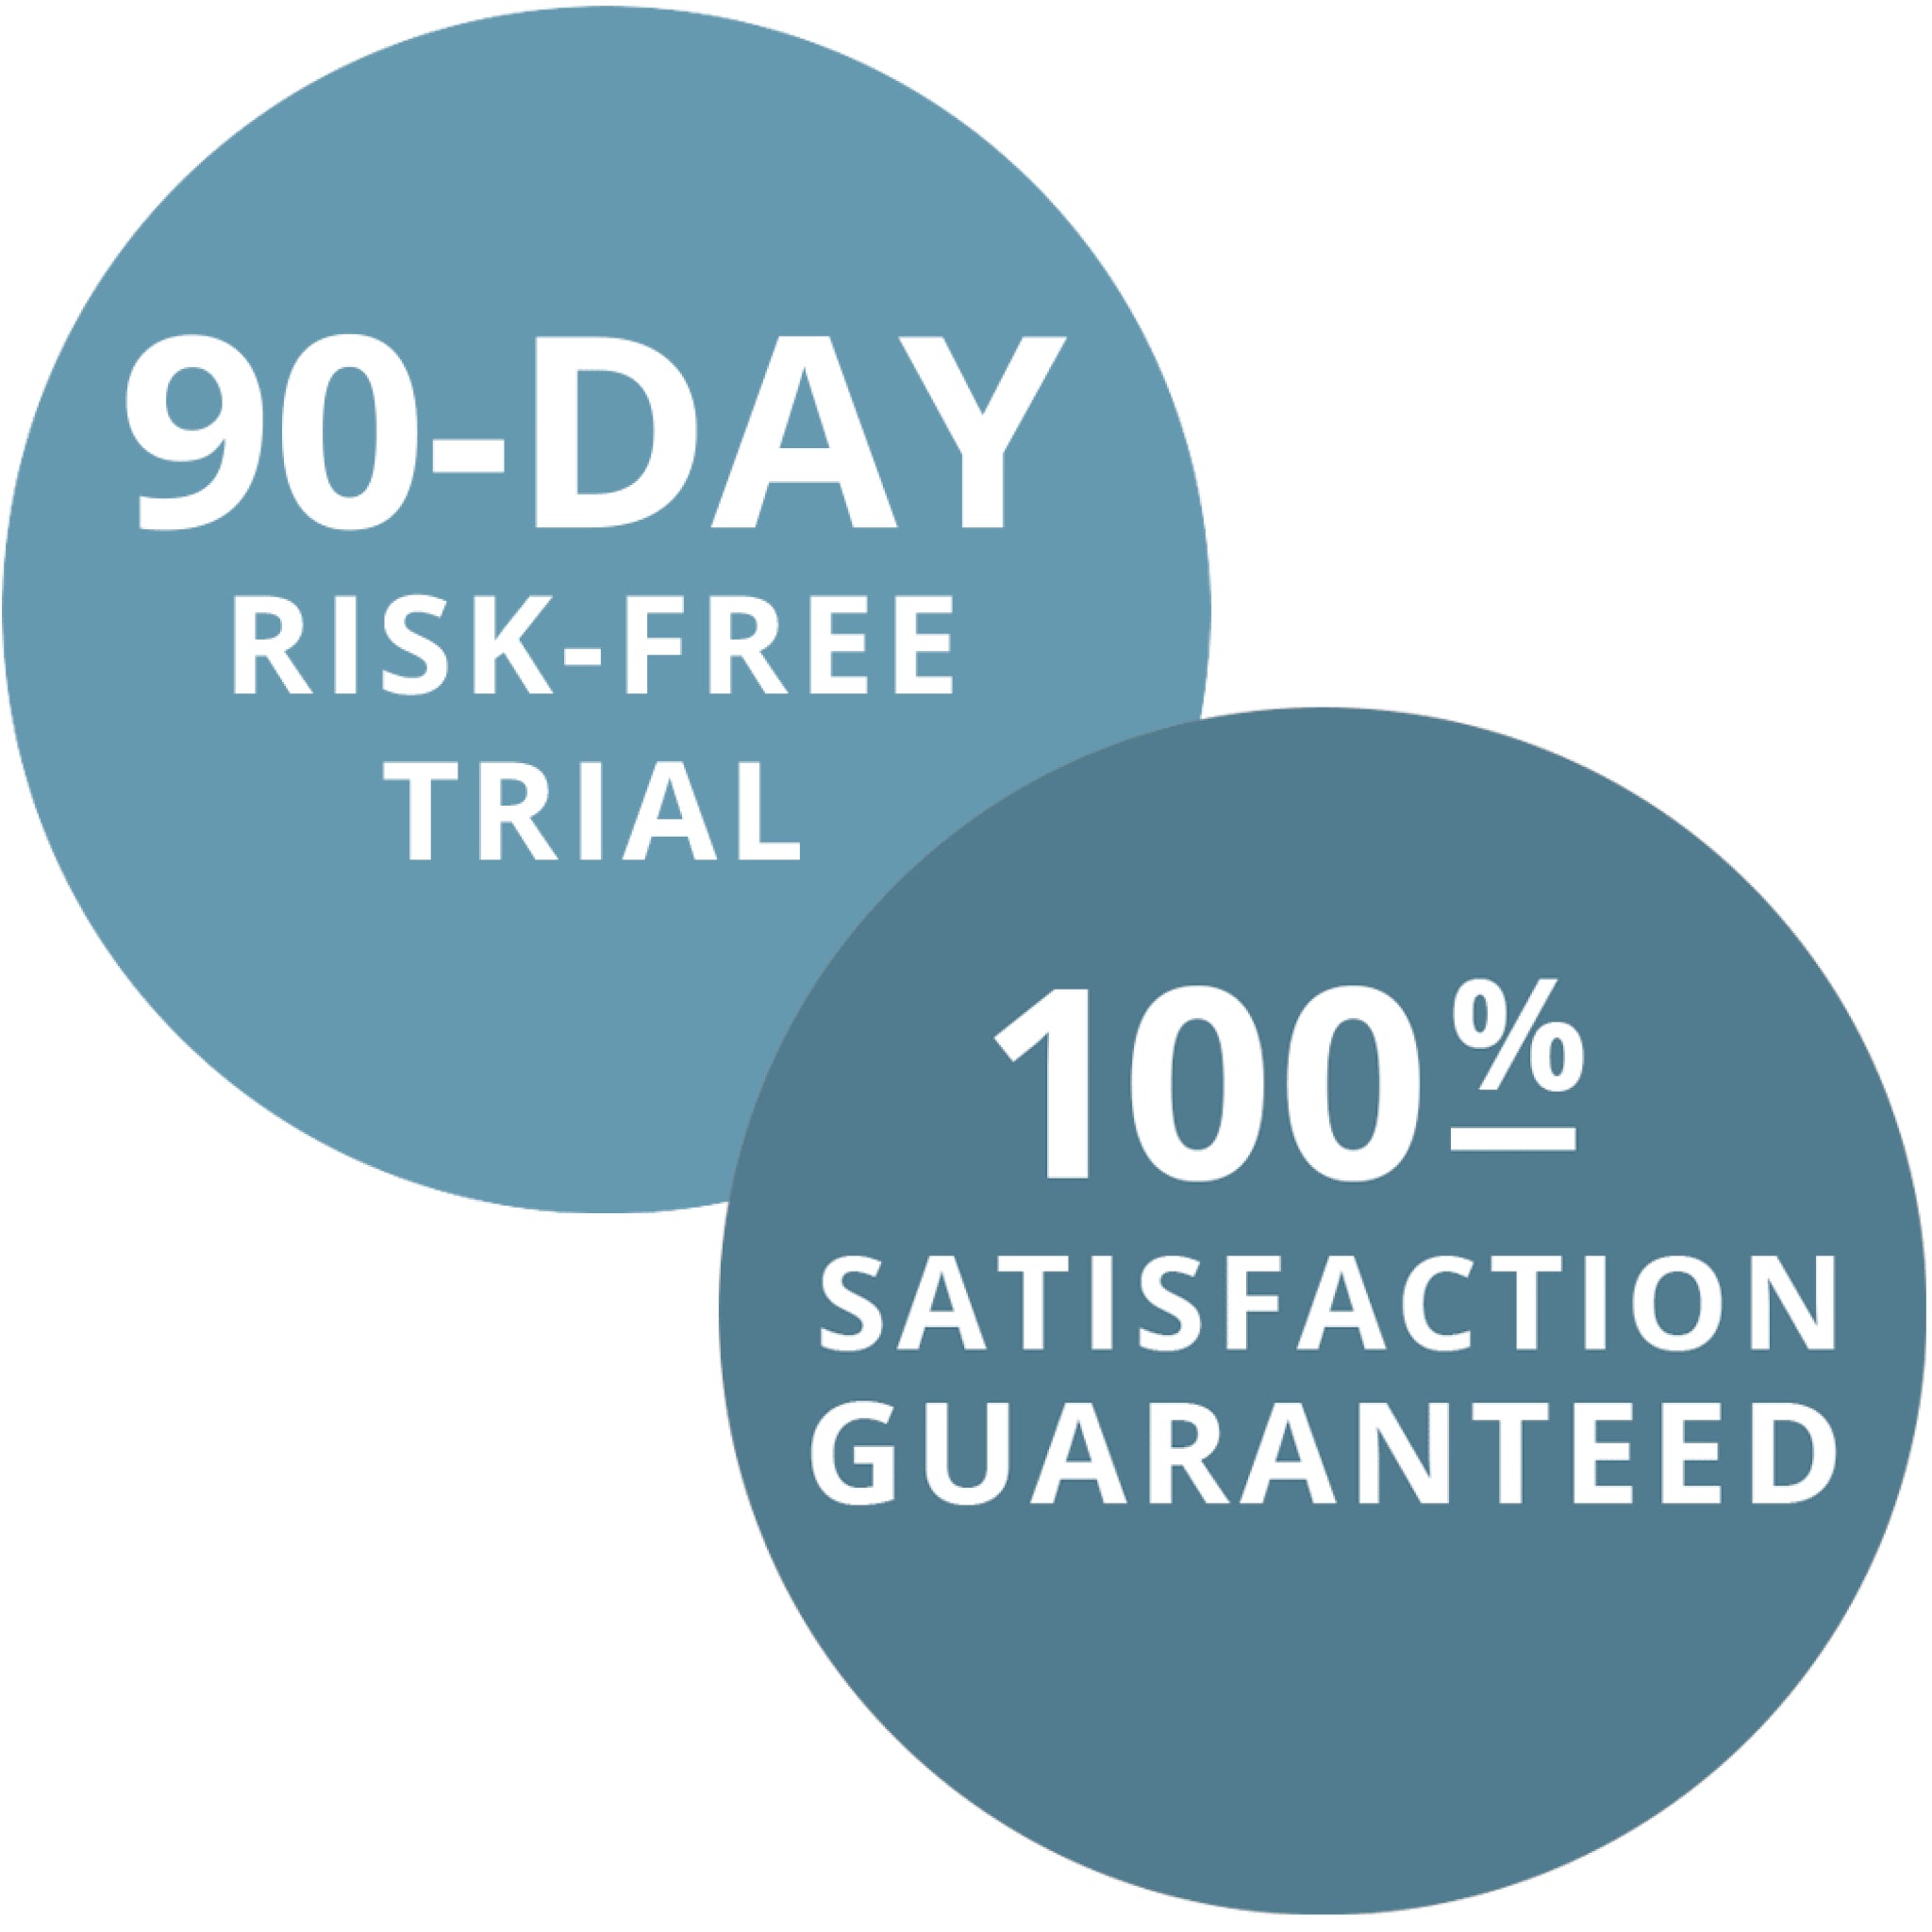 Video: 90-day risk-free trial | 100% satisfaction guaranteed